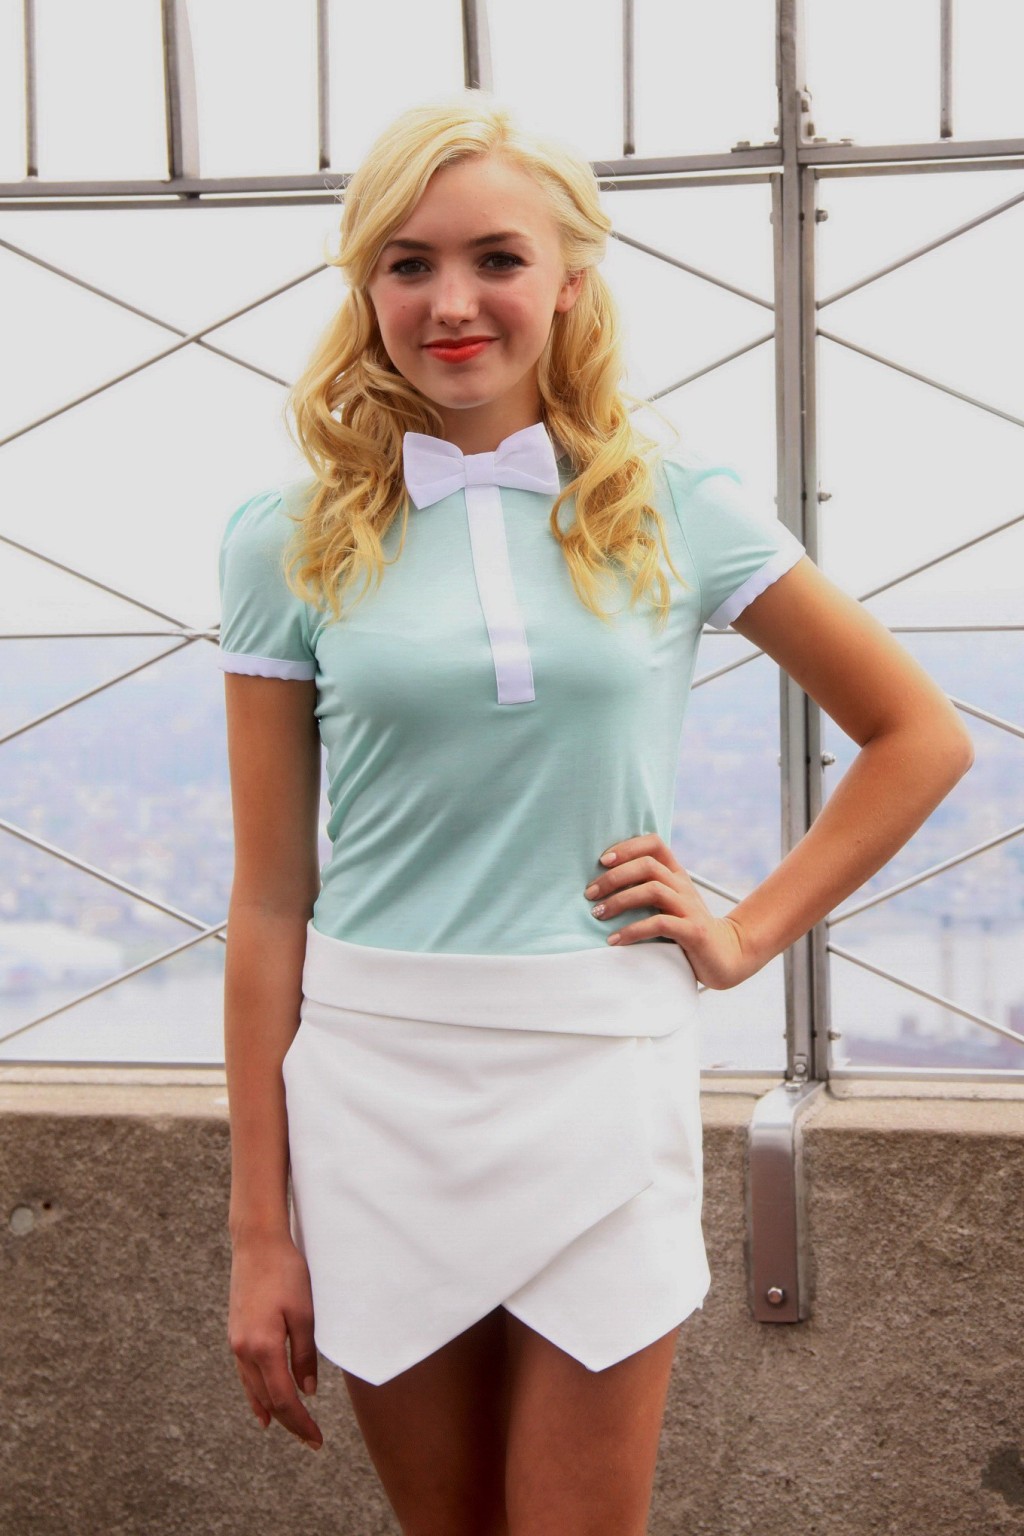 Peyton list leggy wearing tiny hot uniform at the empire state building photocal
 #75197187